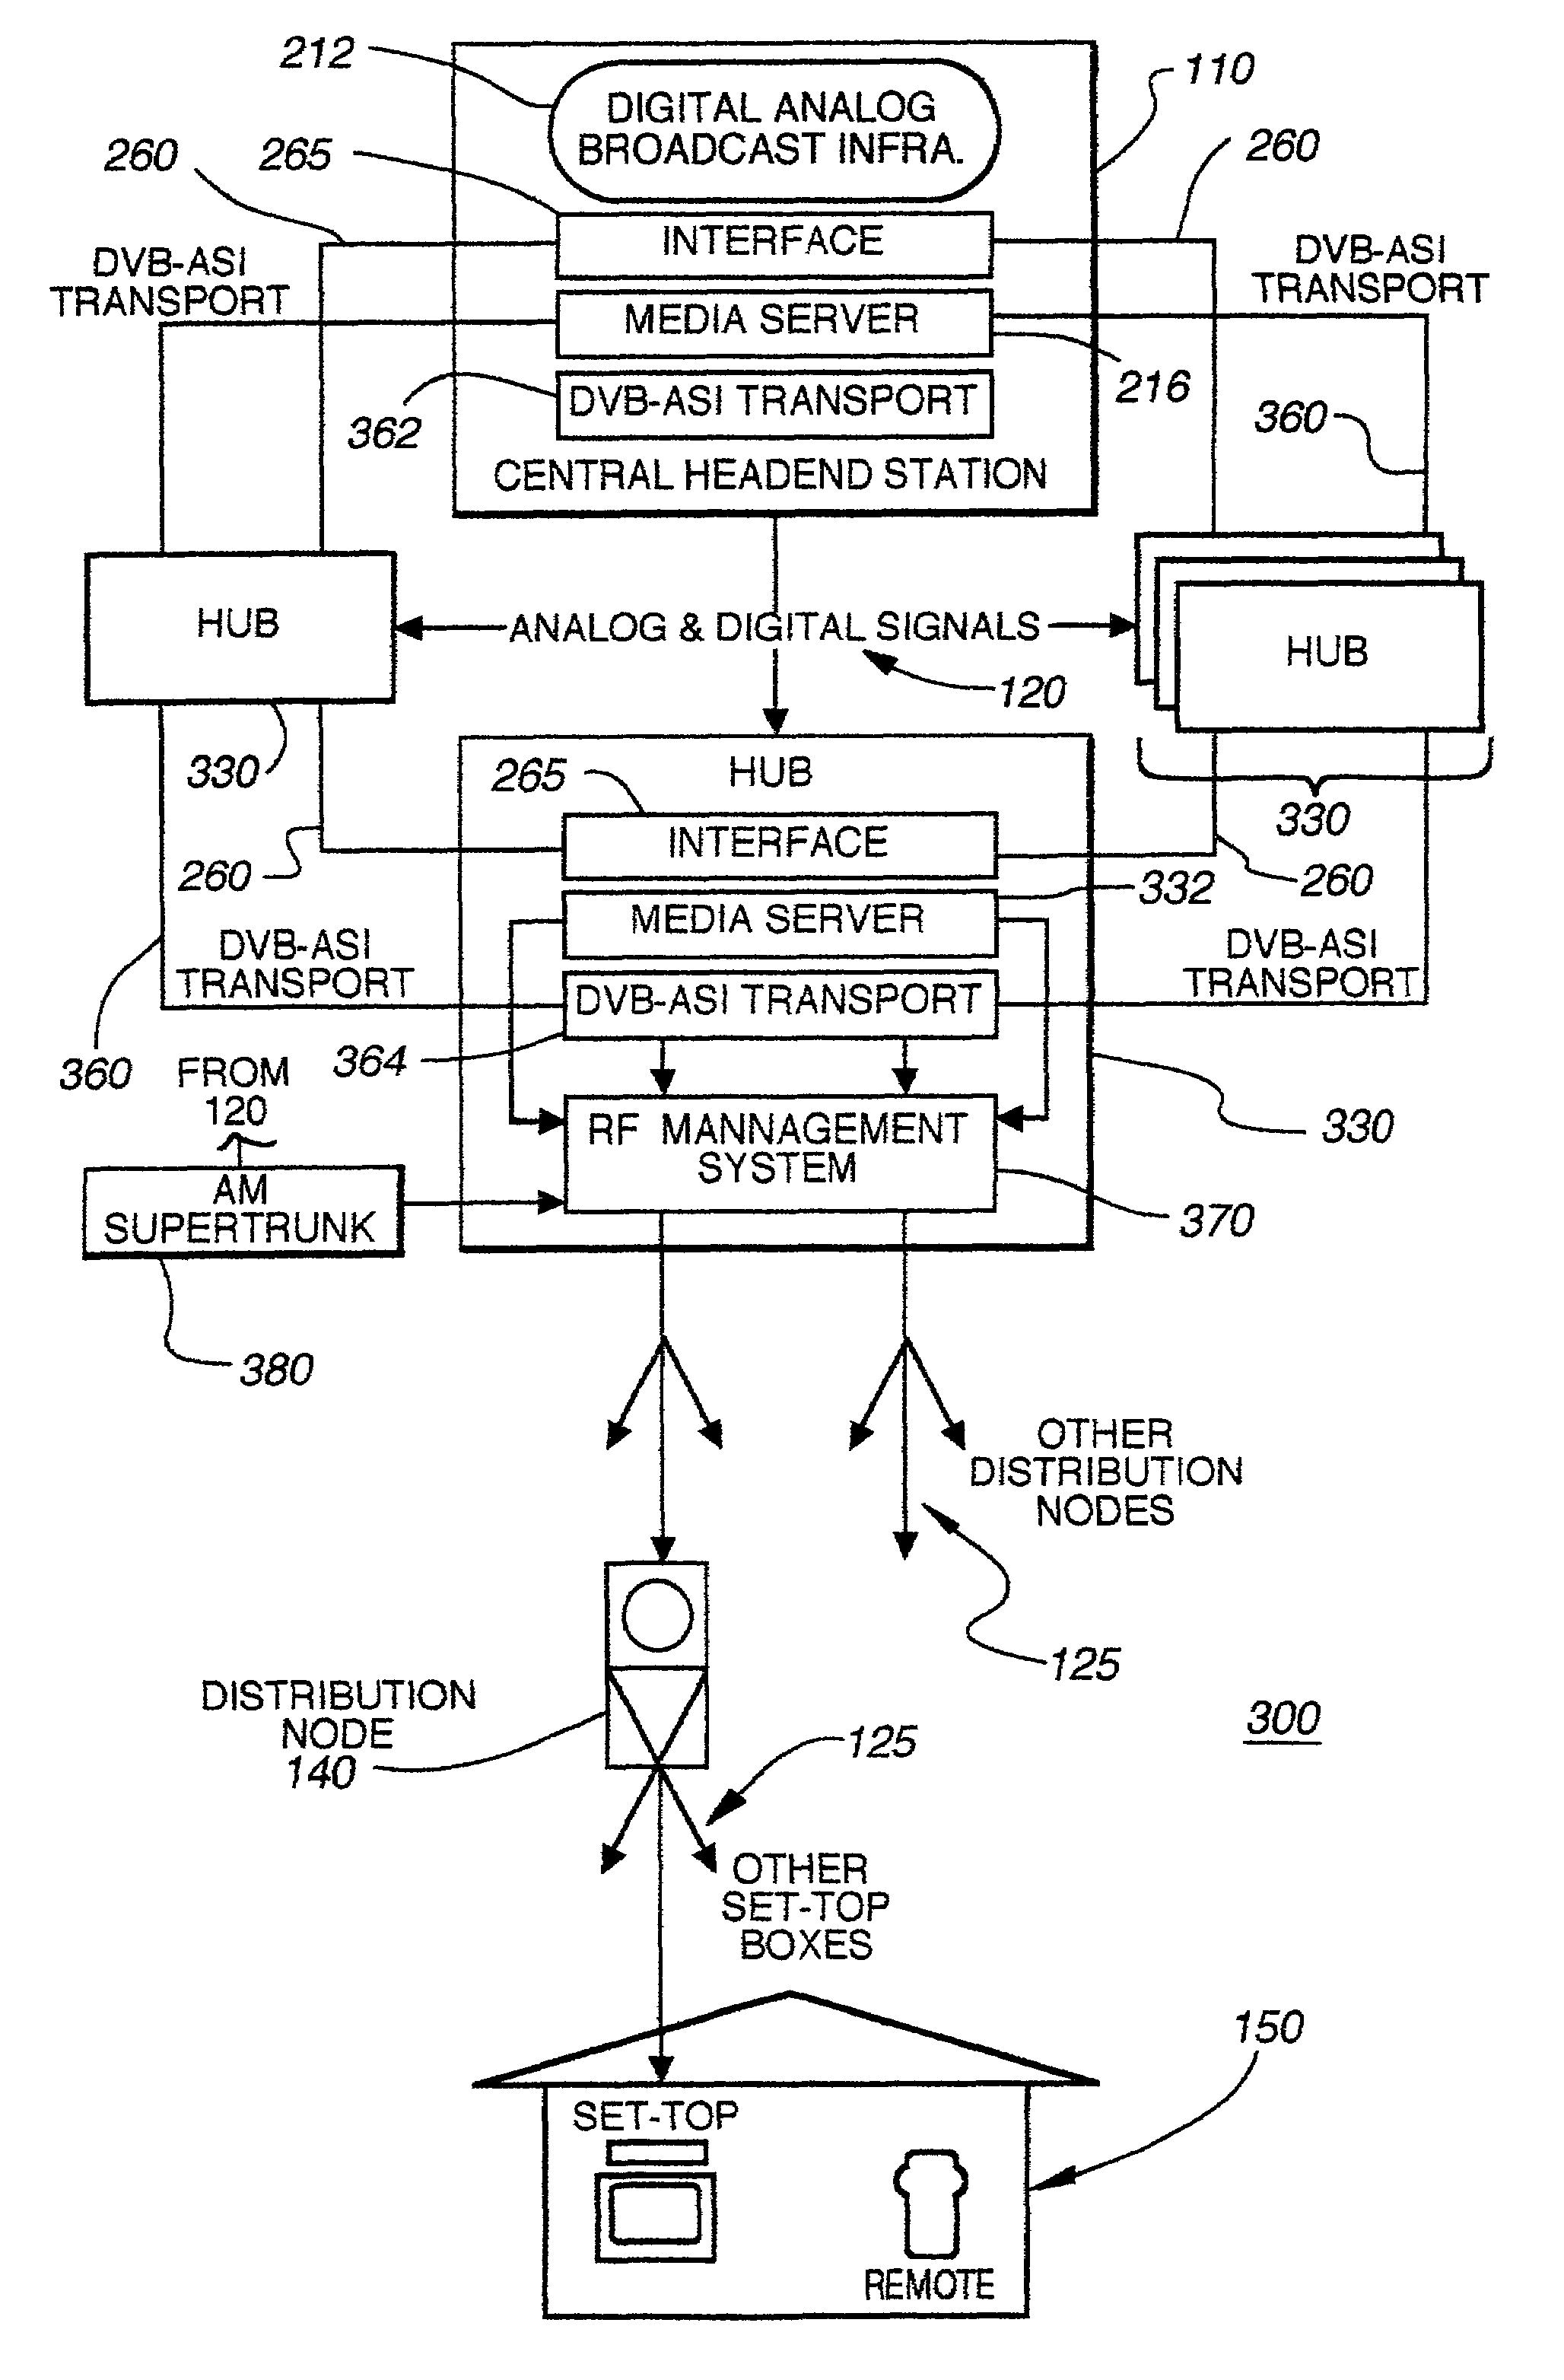 Hybrid central/distributed VOD system with tiered content structure